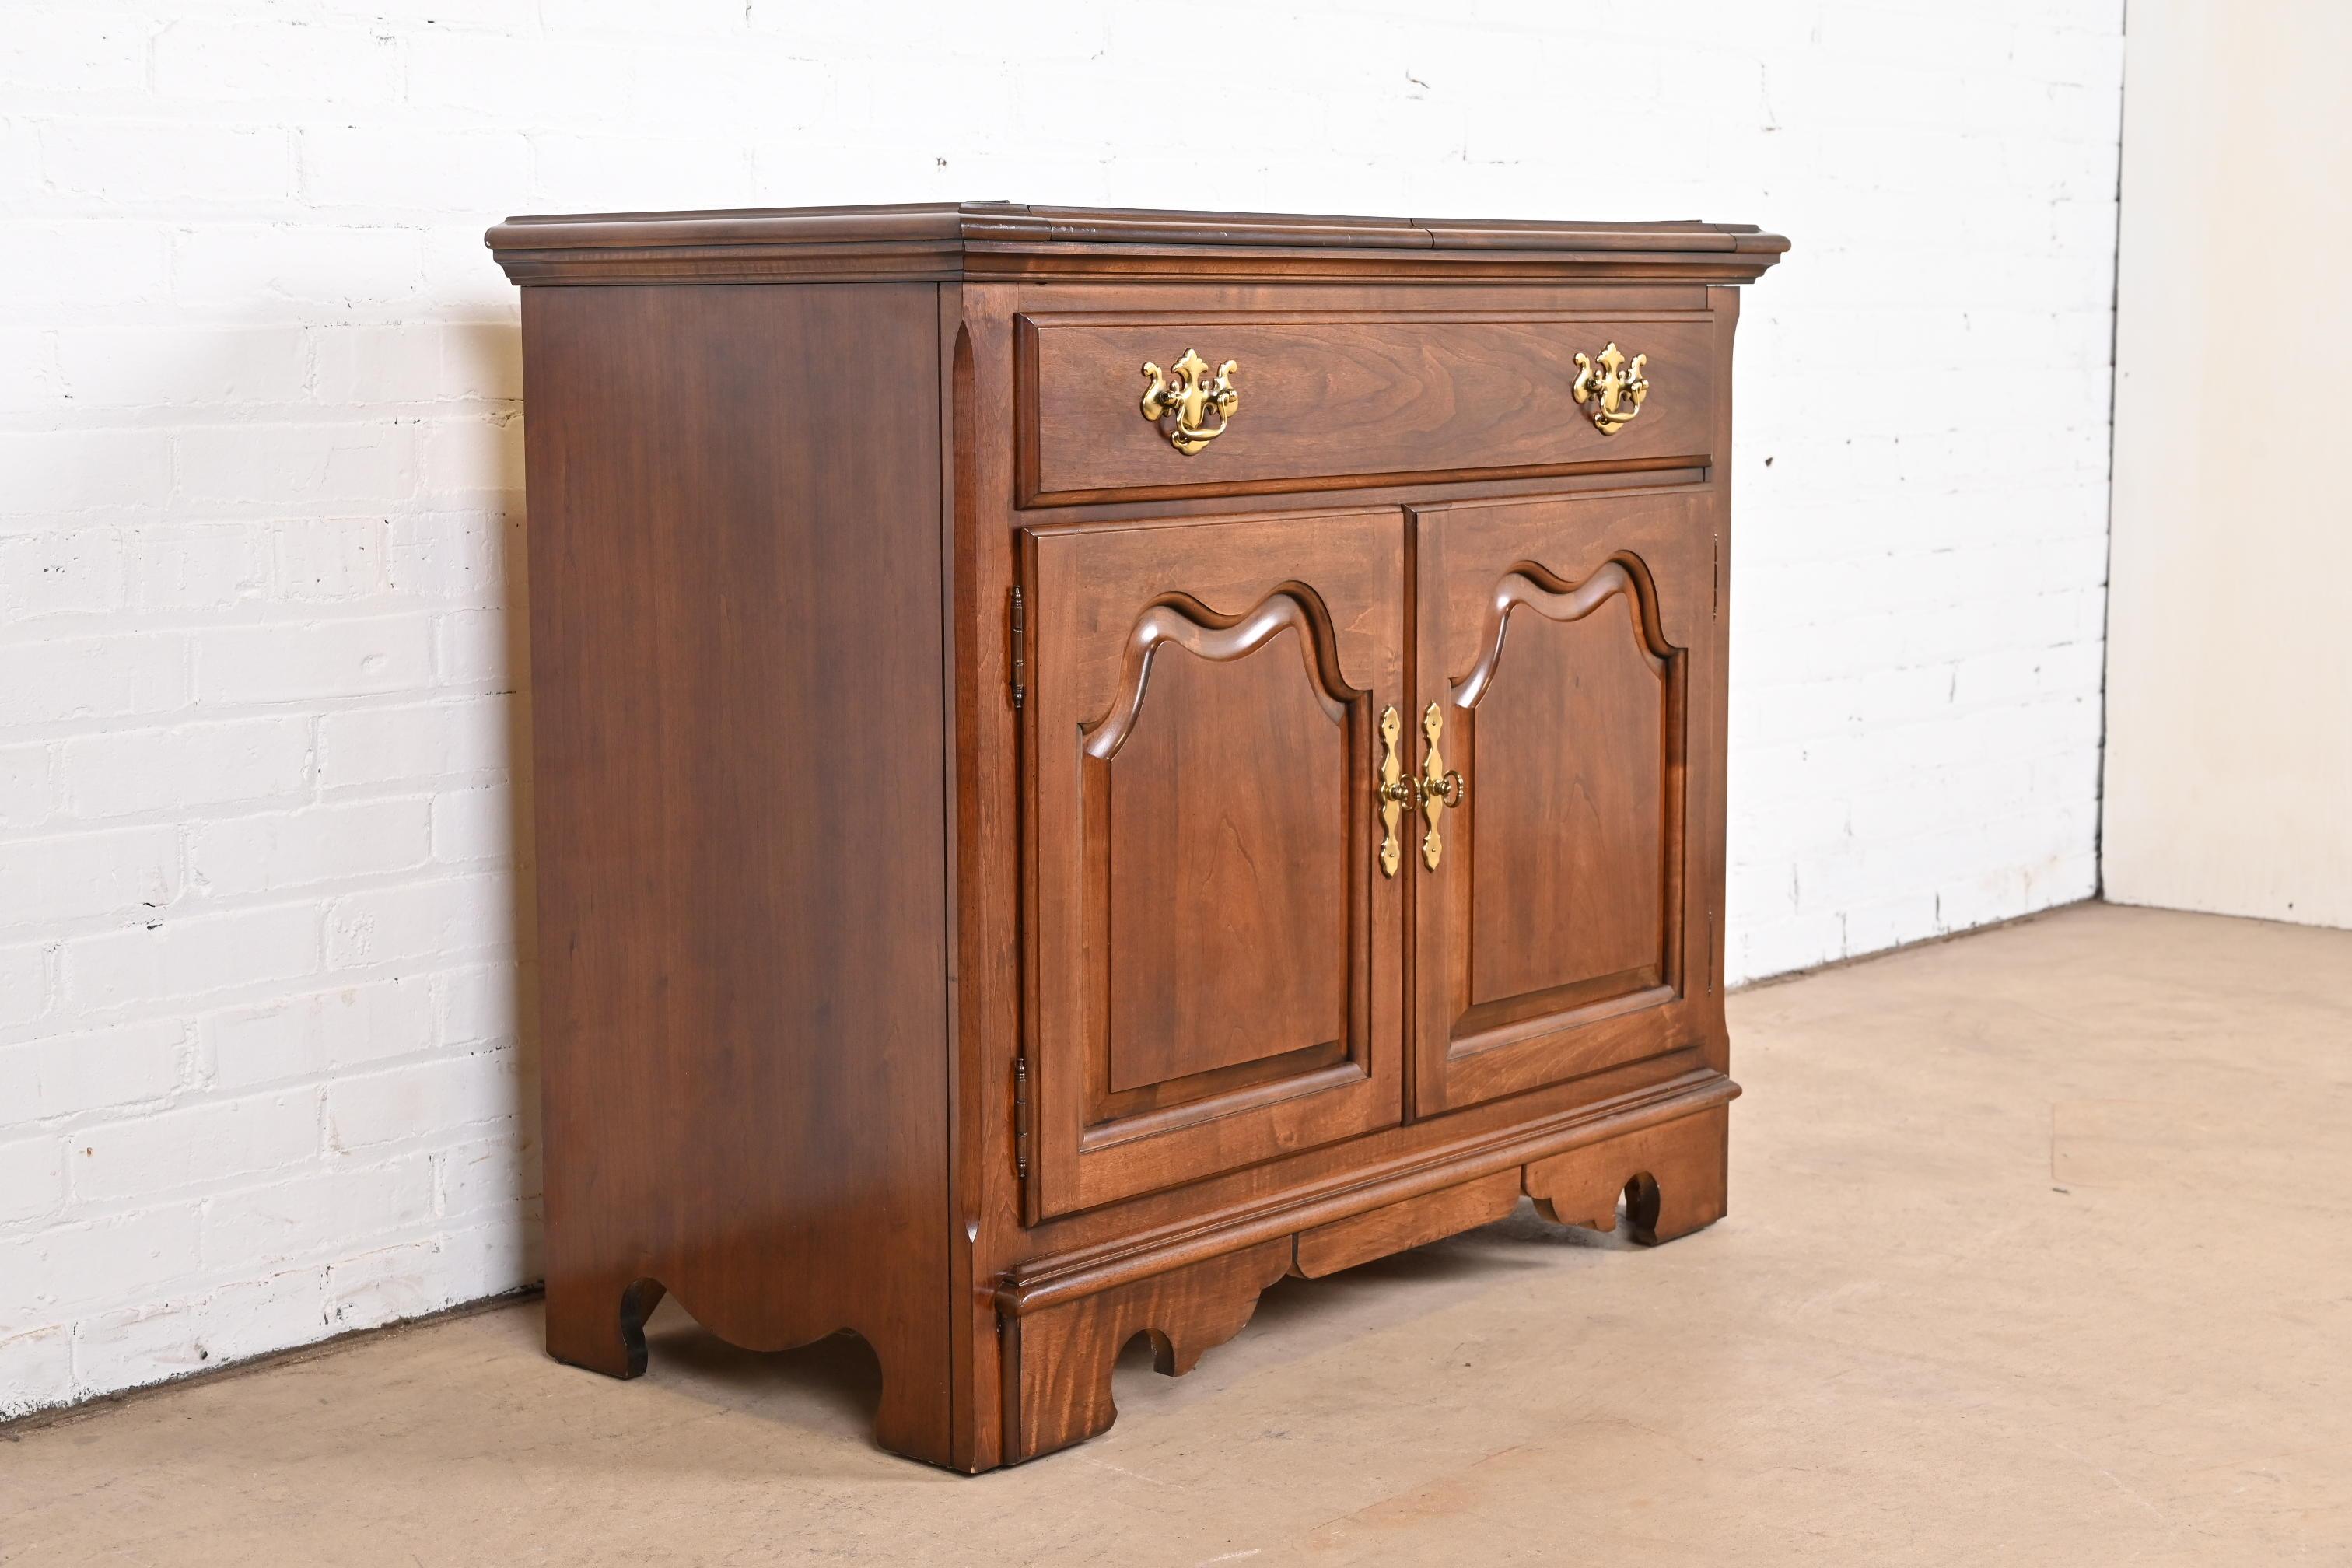 American Thomasville Georgian Solid Cherry Wood Flip Top Server or Bar Cabinet For Sale